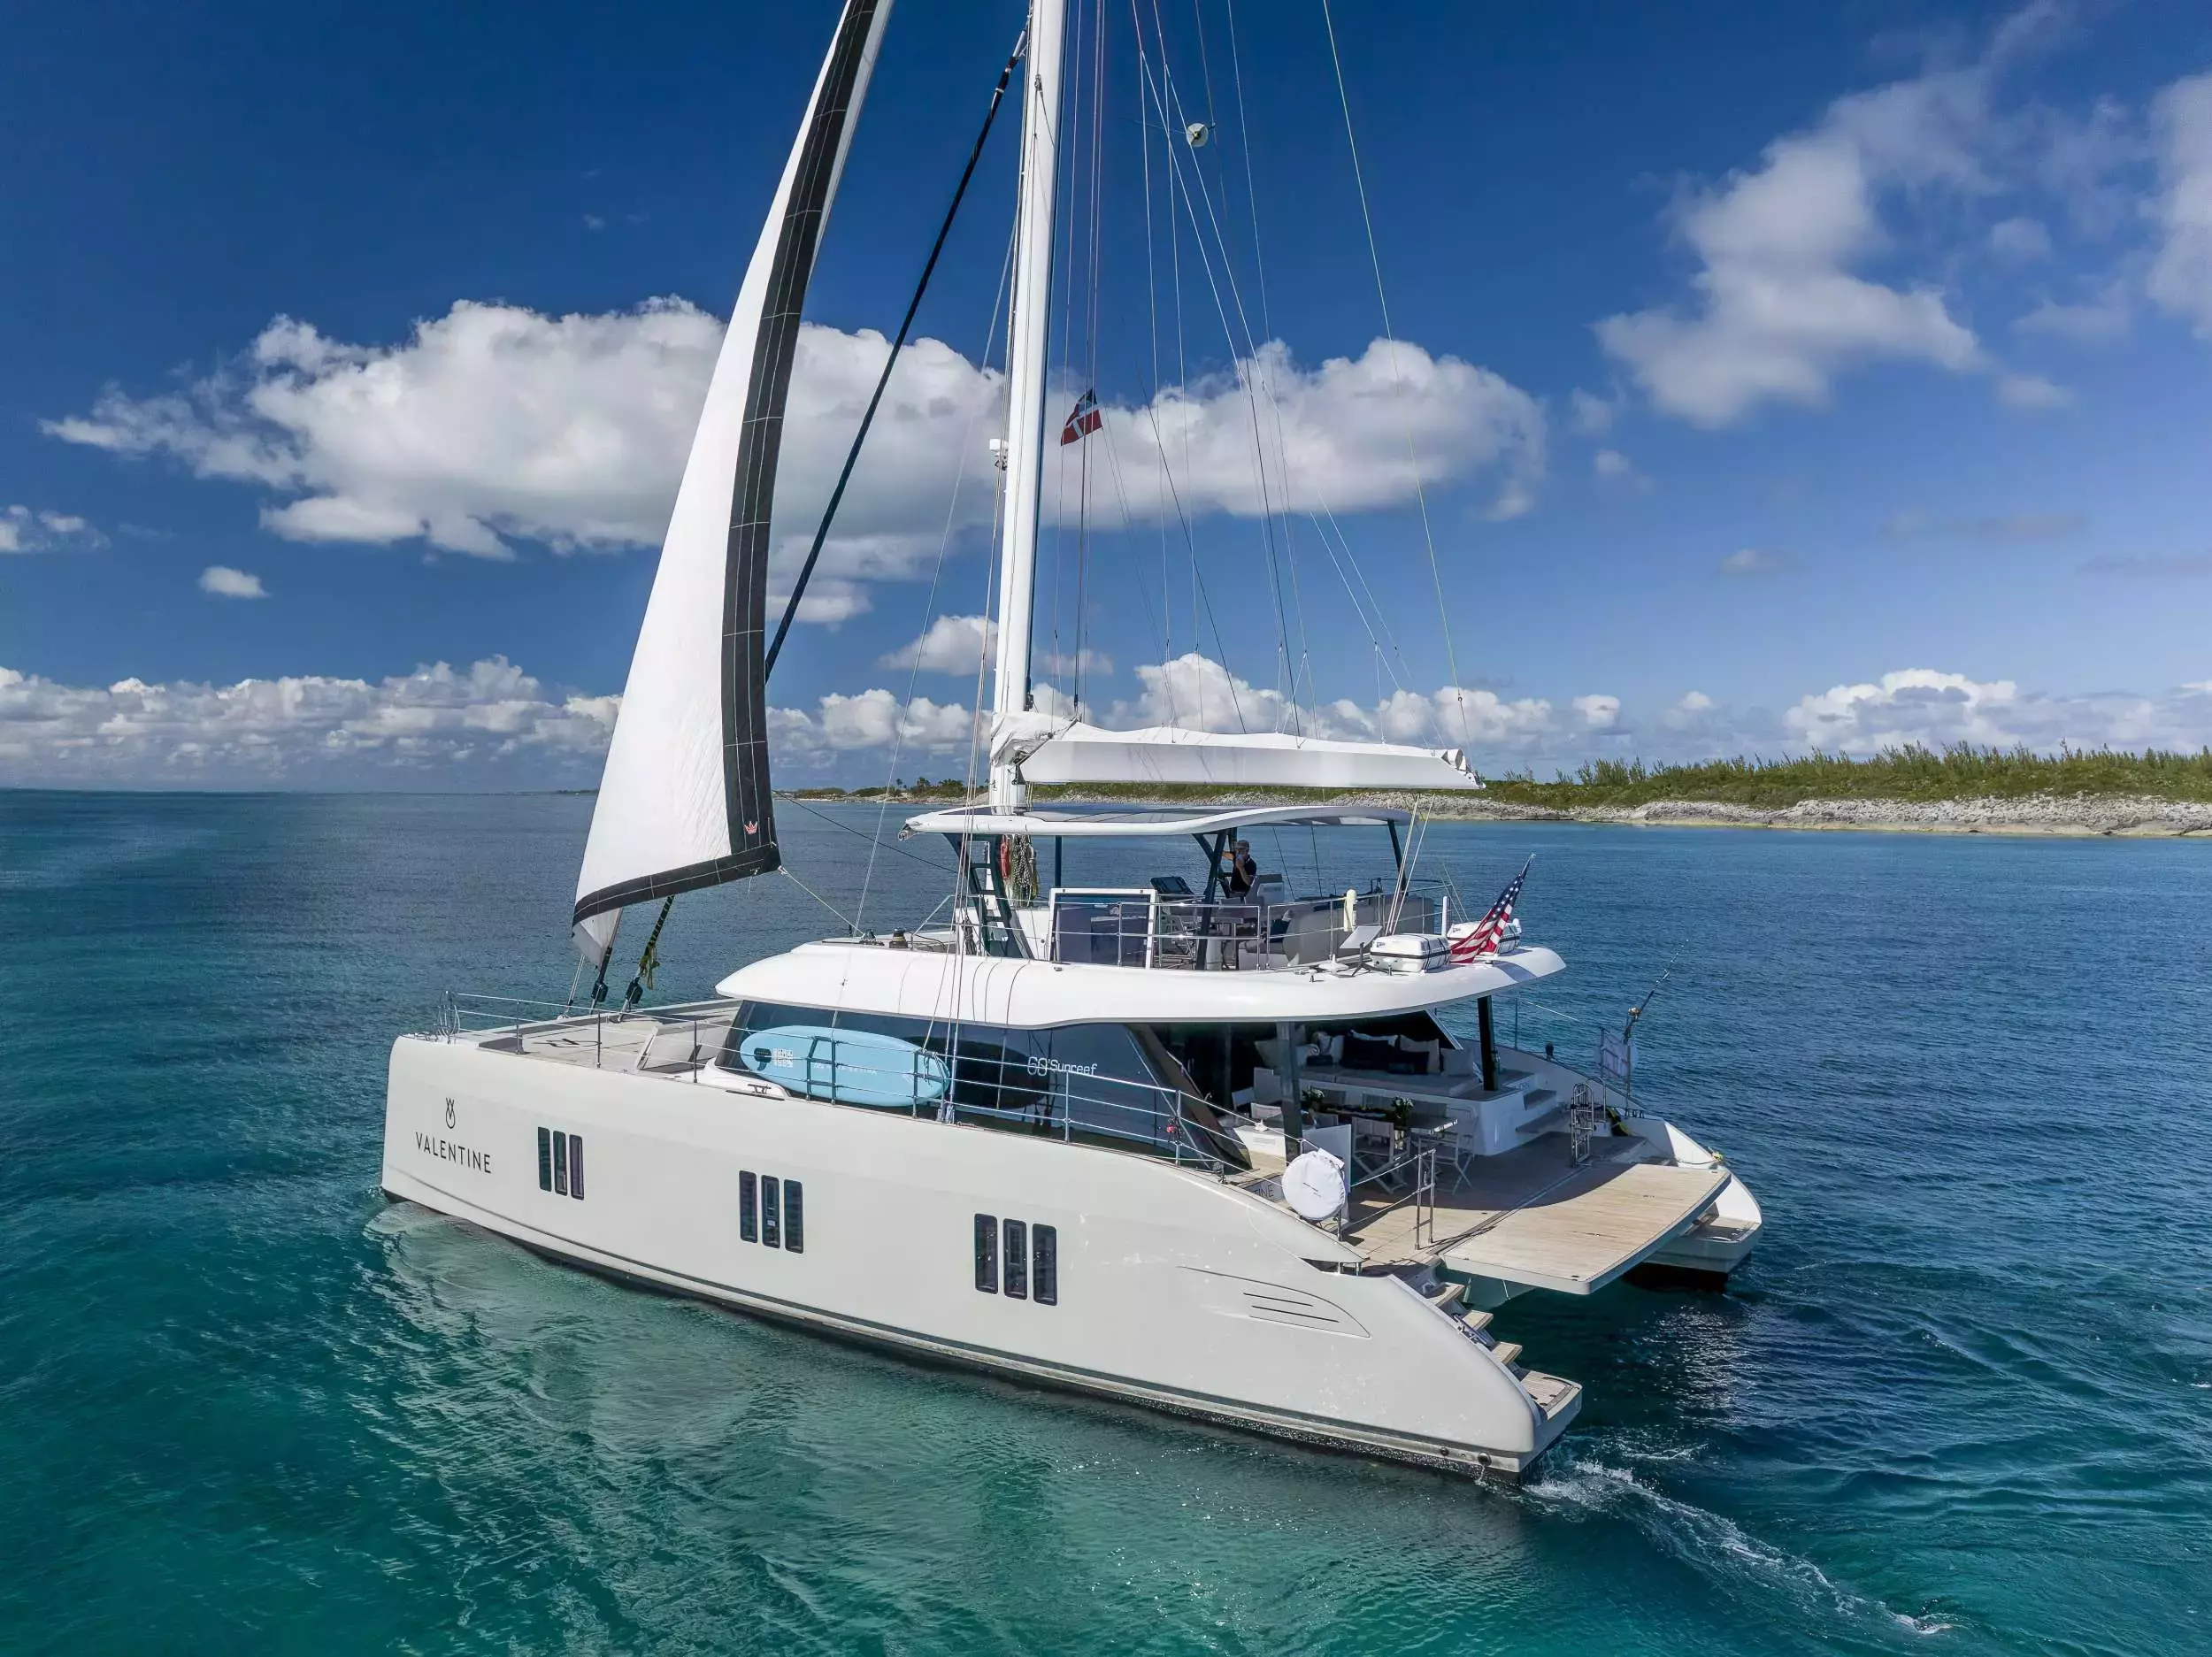 Valentine by Sunreef Yachts - Special Offer for a private Power Catamaran Rental in Fajardo with a crew